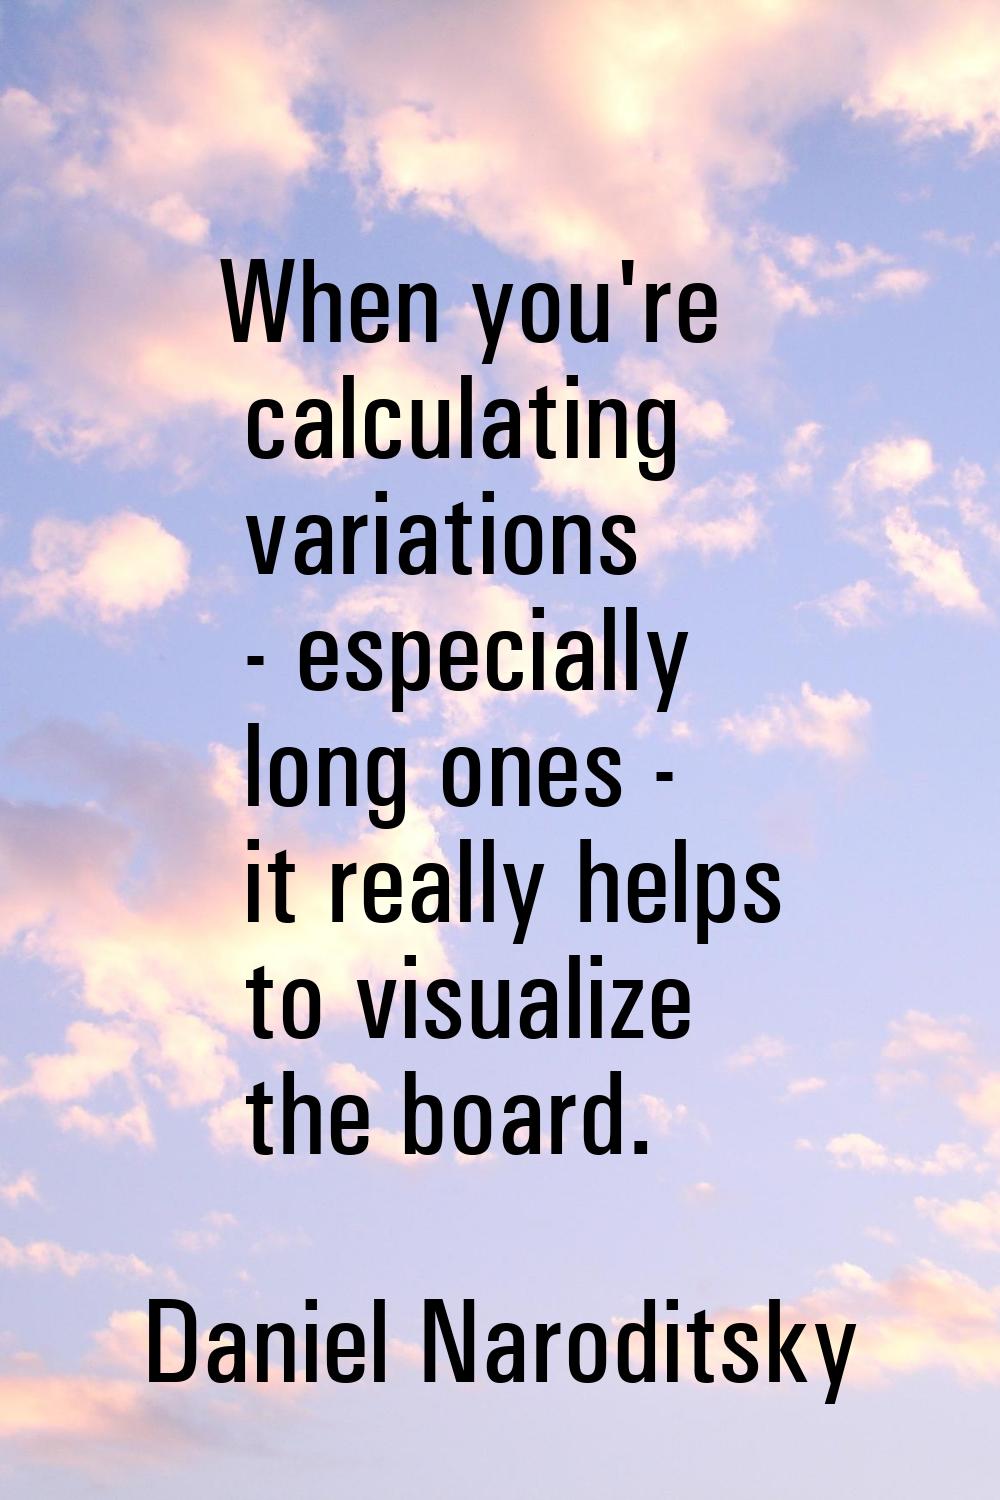 When you're calculating variations - especially long ones - it really helps to visualize the board.